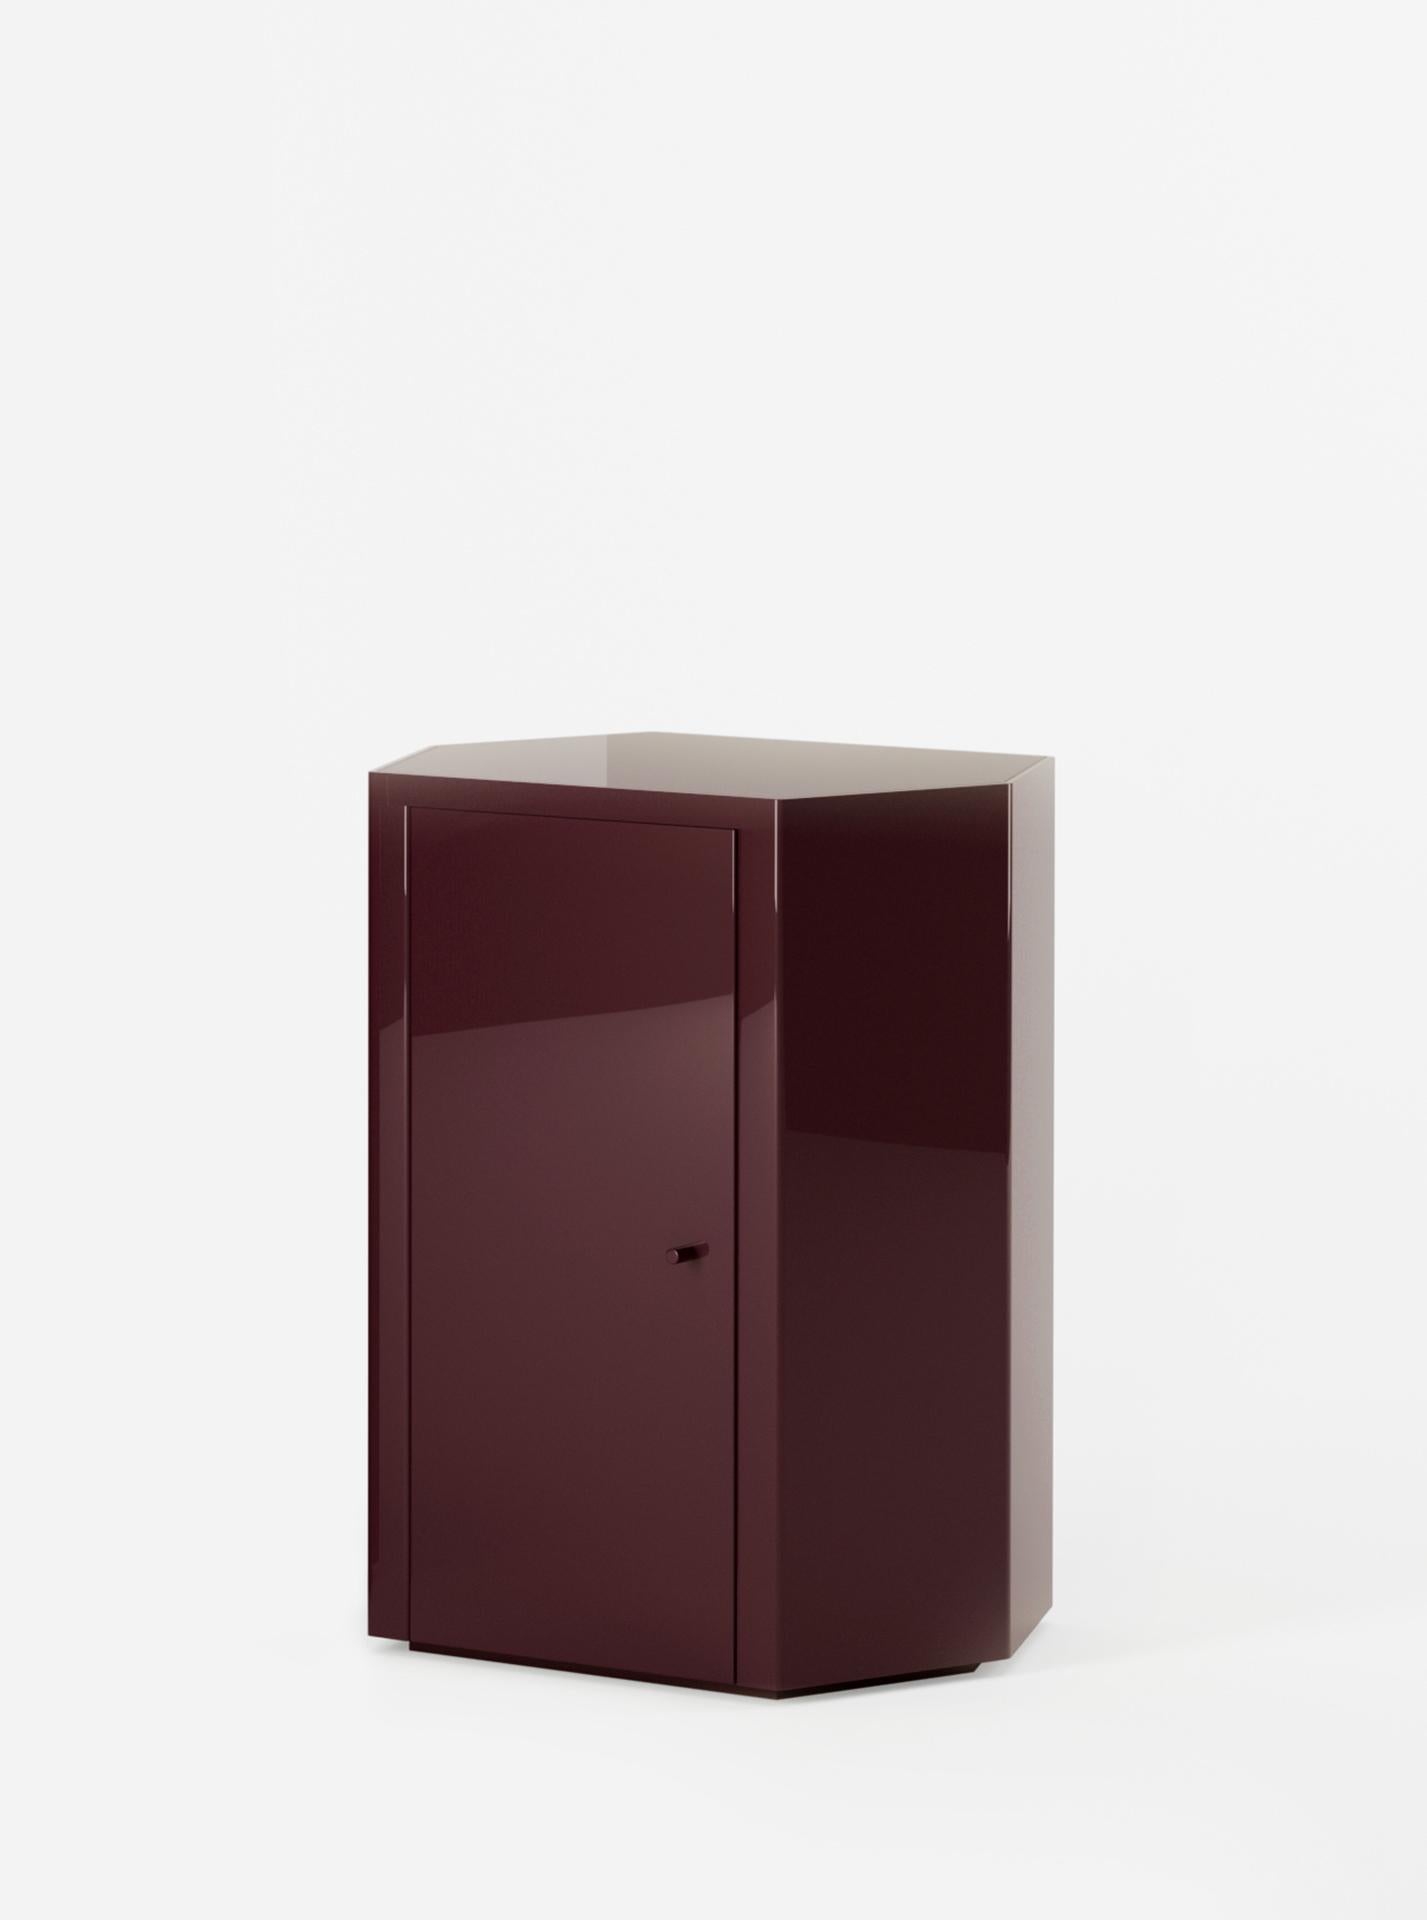 South African Pair of Park Night Stands in Noir Oxblood Lacquer by Yaniv Chen for Lemon For Sale